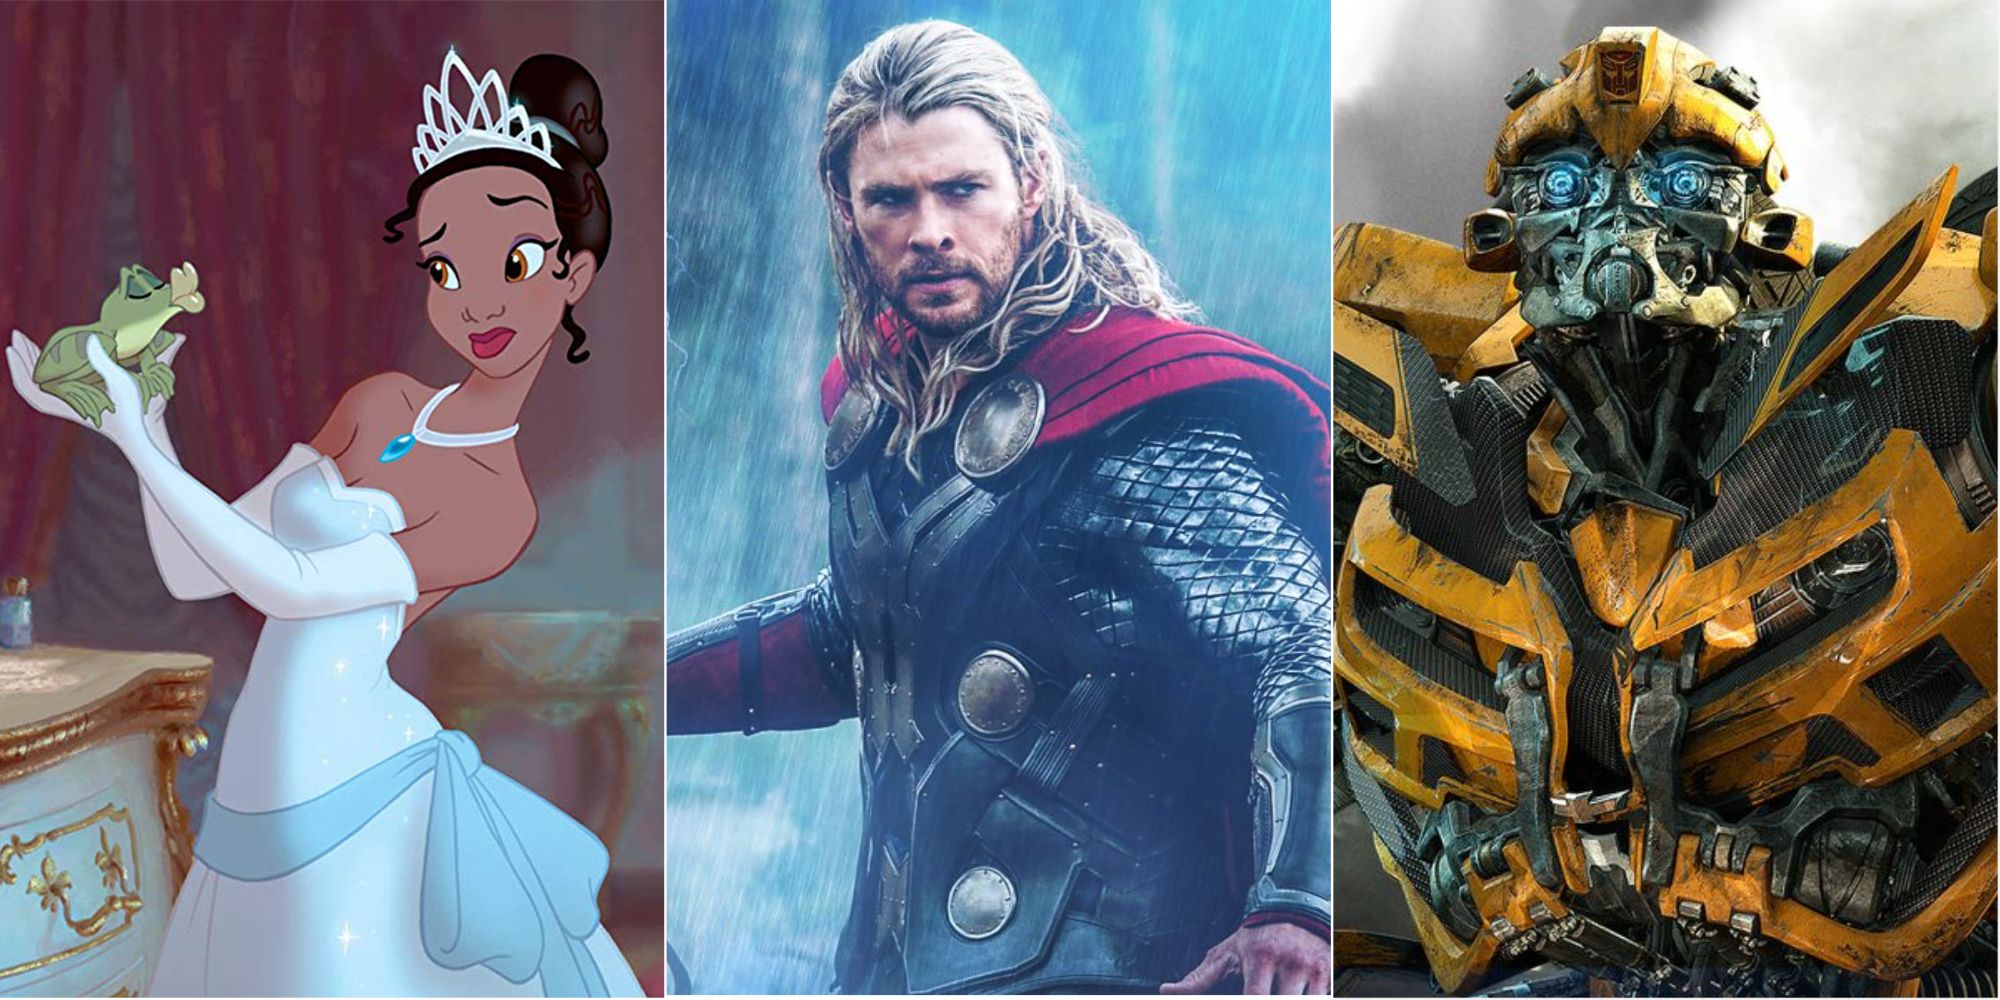 Tiana from princess in the frog, thor, and bumblebee from transformers